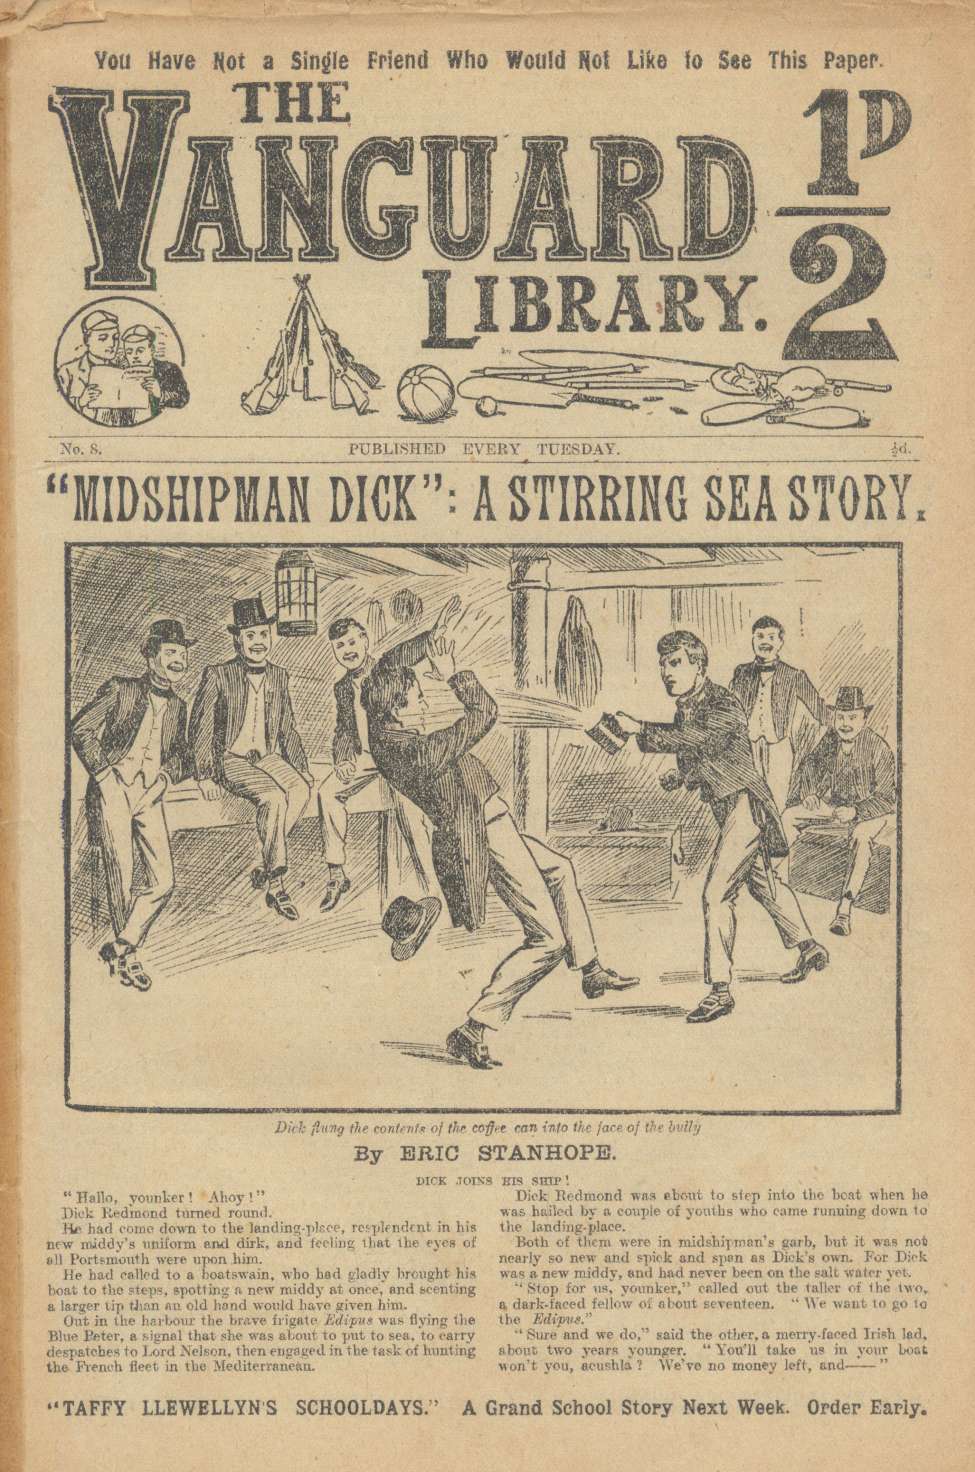 Book Cover For Vanguard Library 8 - Midshipman Dick